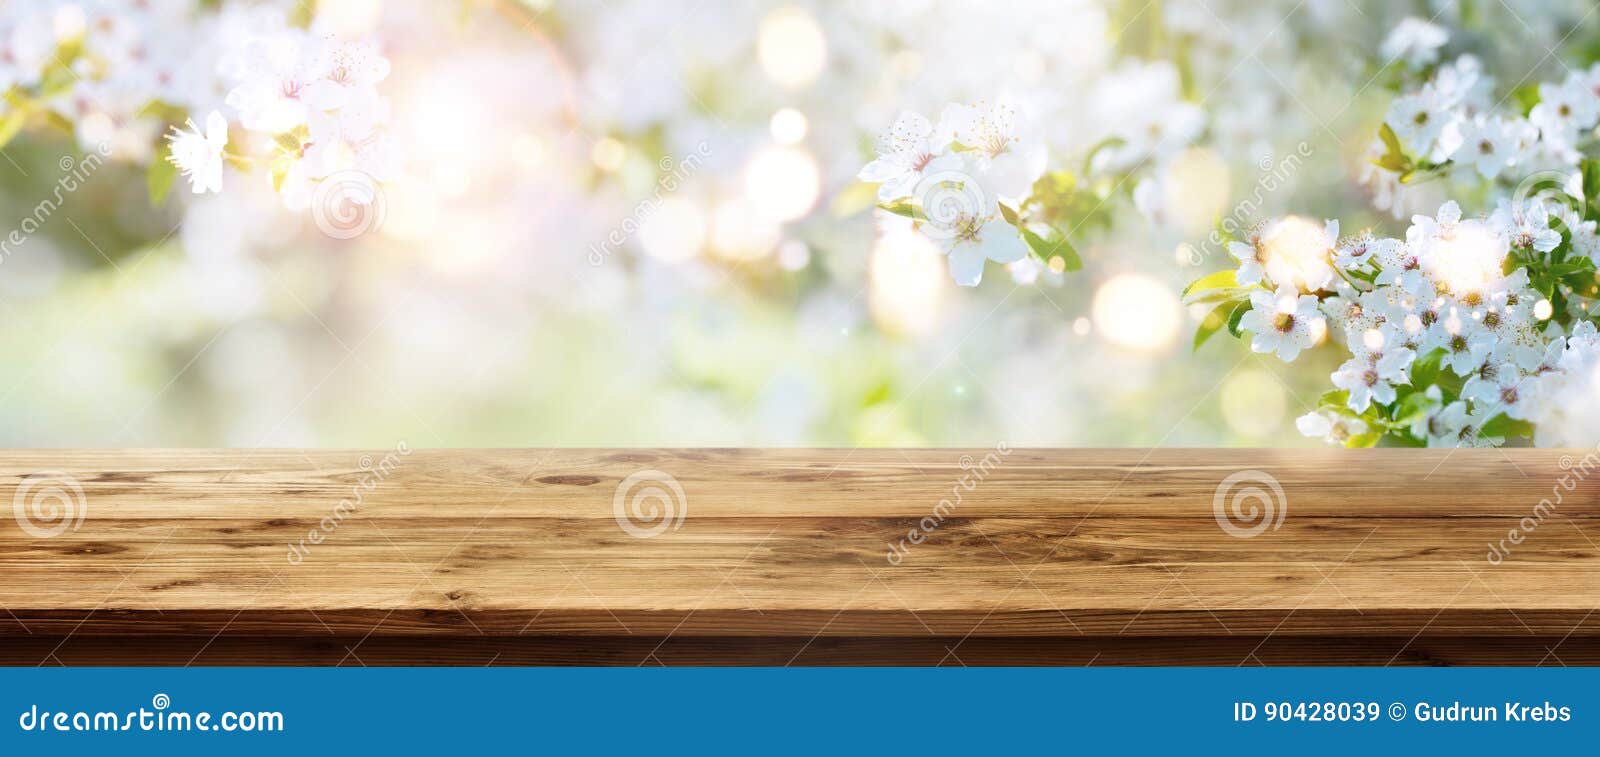 spring background with wooden table